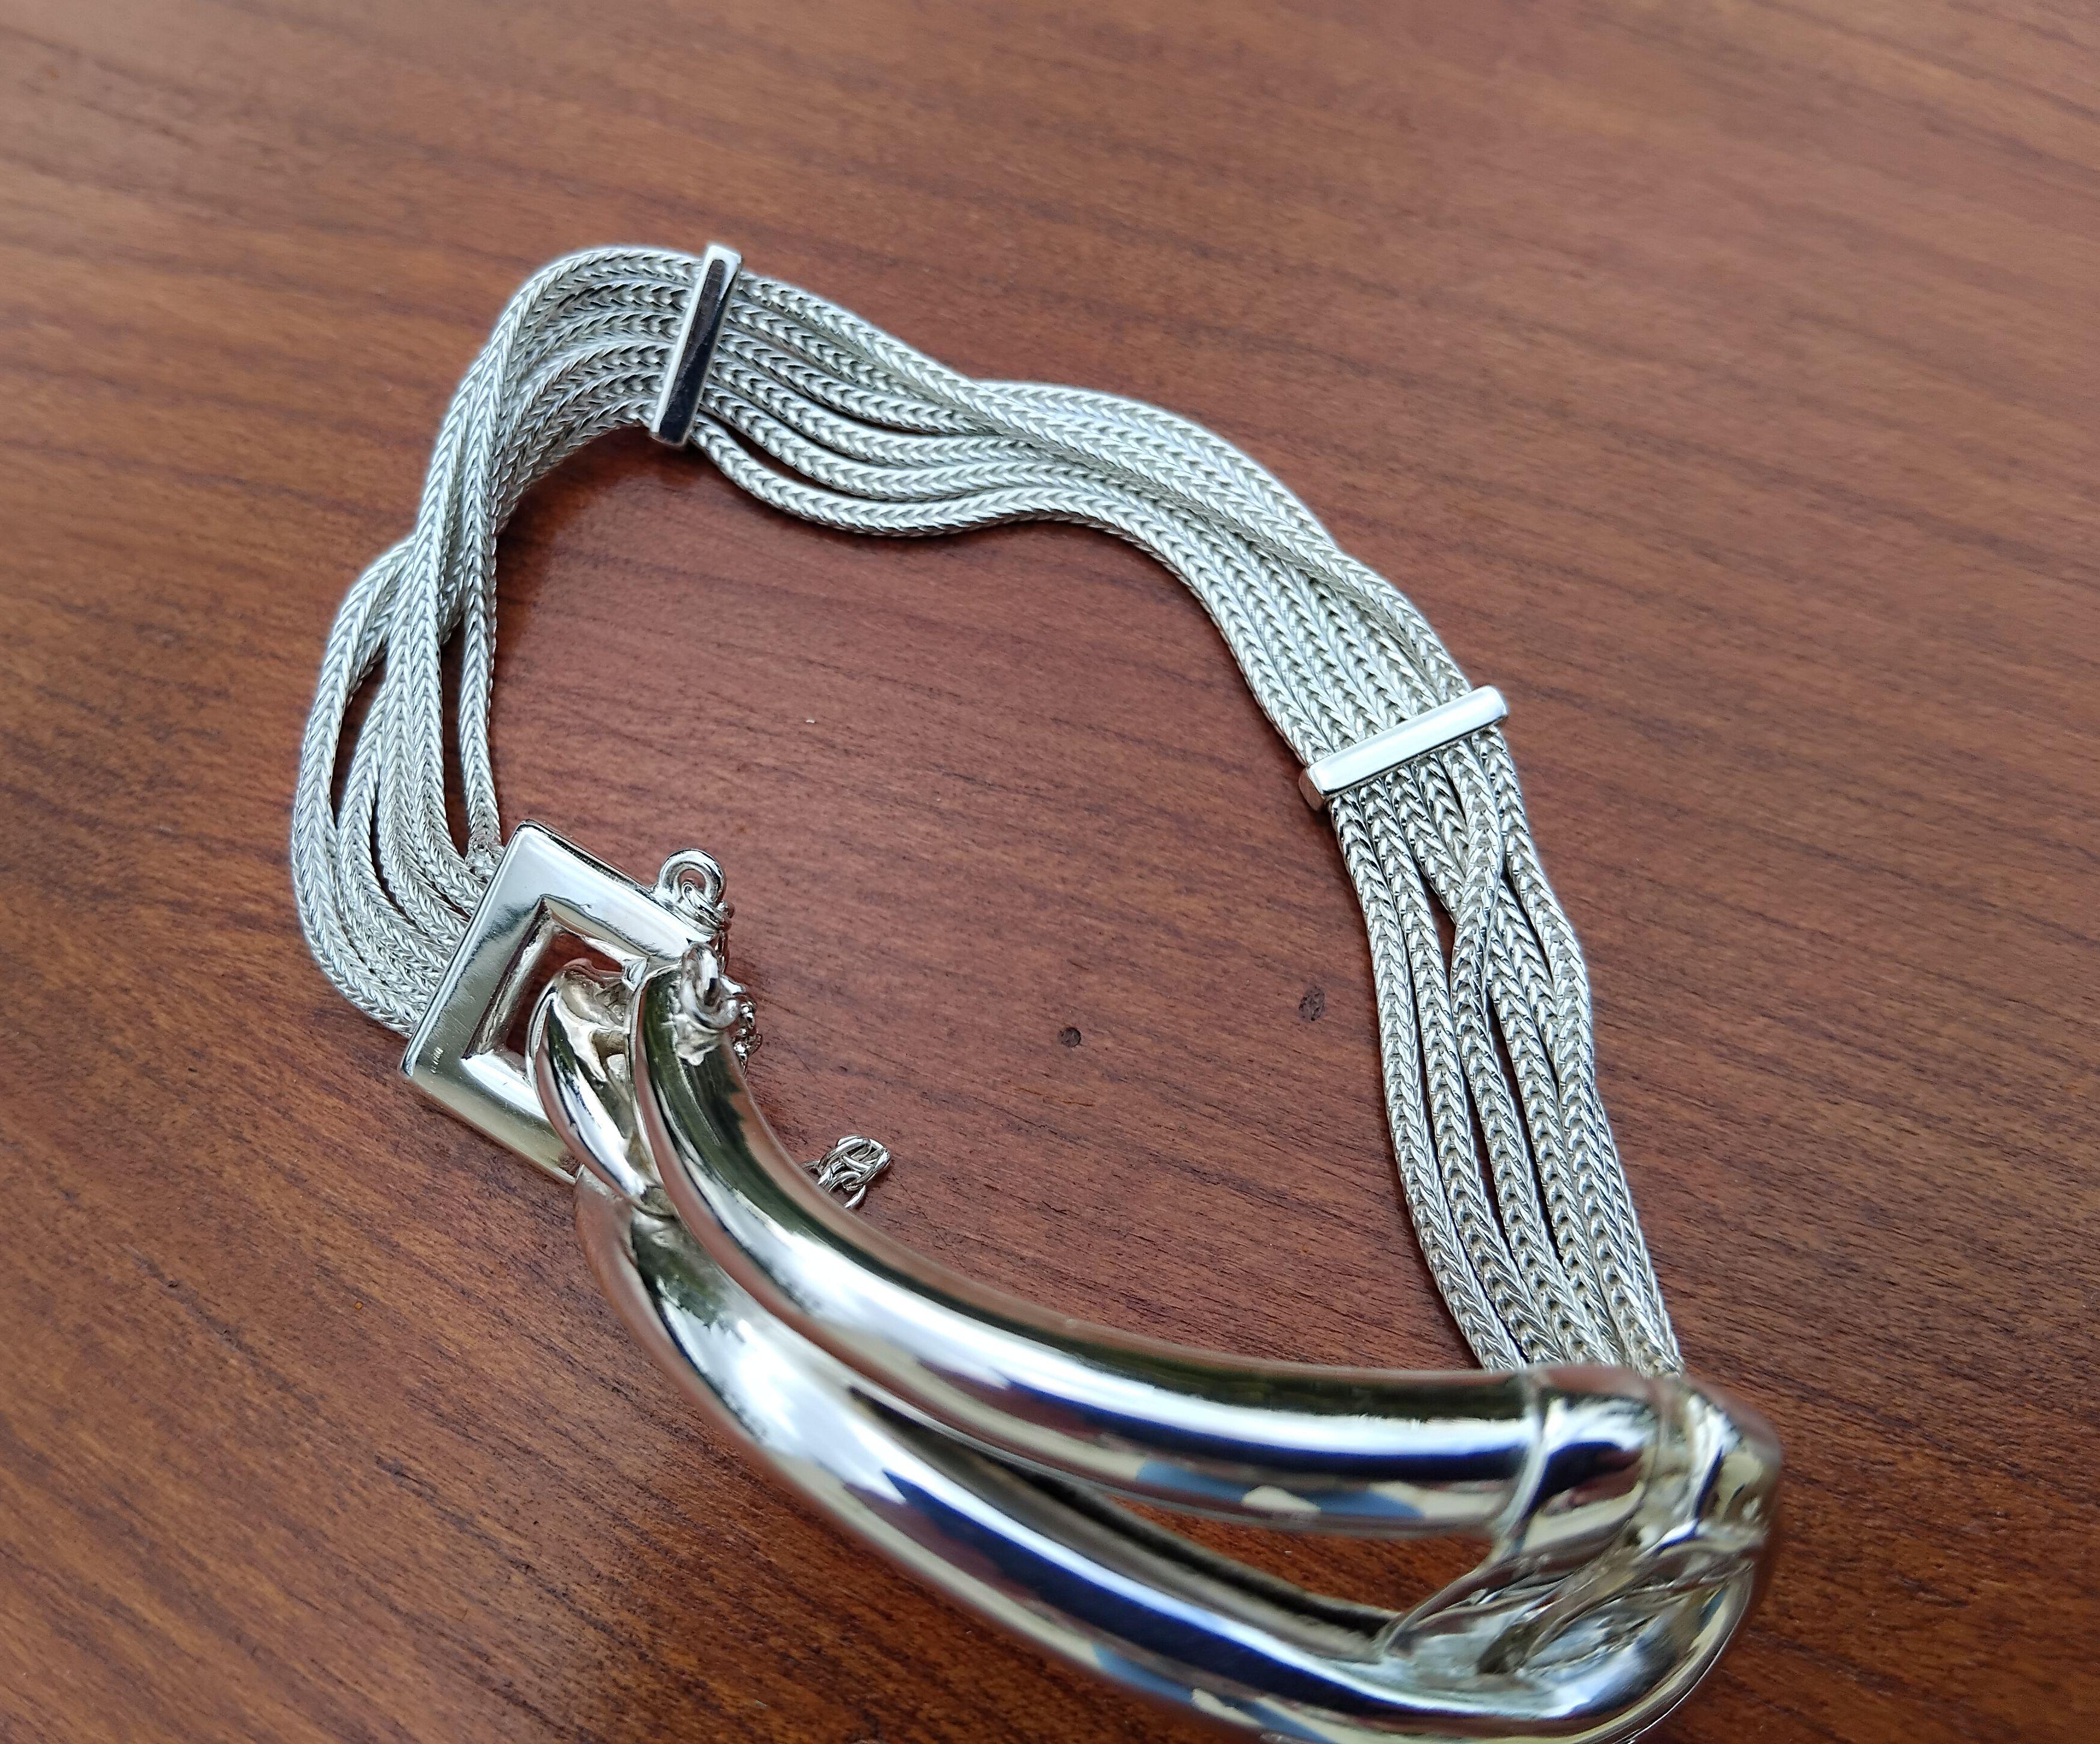 Exceptional Hermès Bracelet Equestrian Theme Stirrups Charms in Silver Texas  For Sale 4